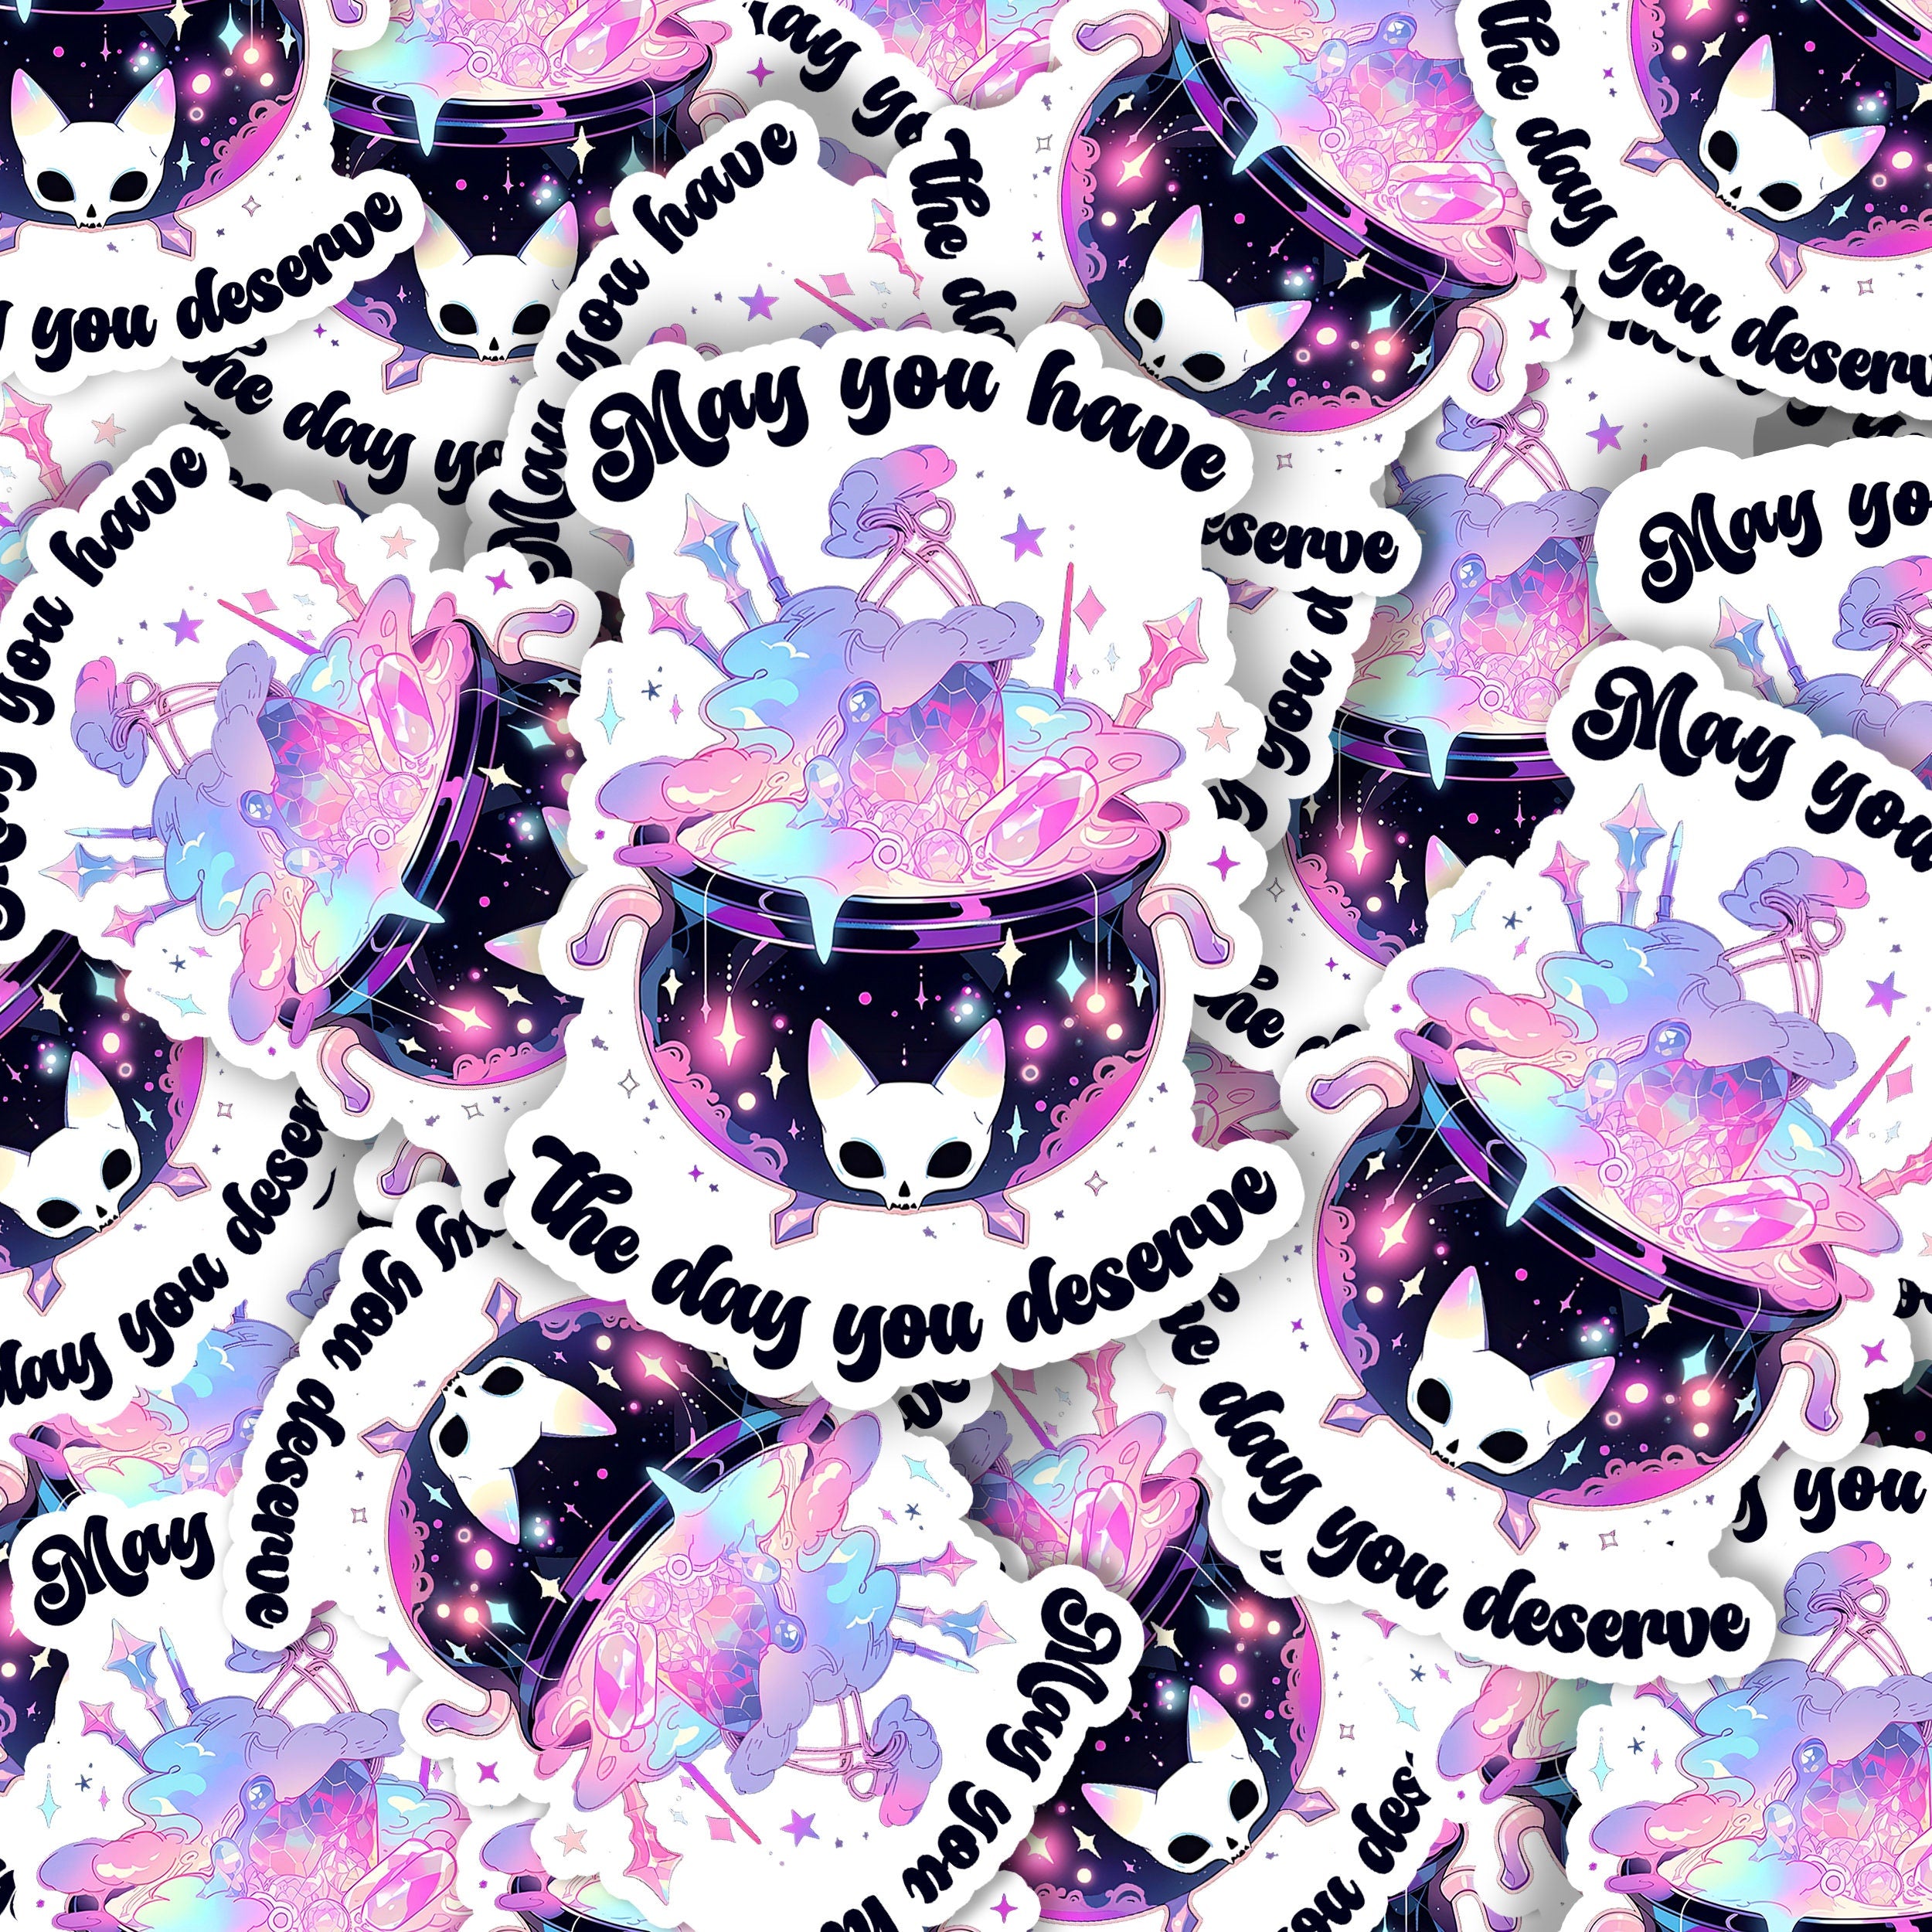 Have The Day You Deserve Sticker || Witchy Halloween Sticker, kindle stickers, witchy decor, laptop, vinyl sticker, pastel spooky